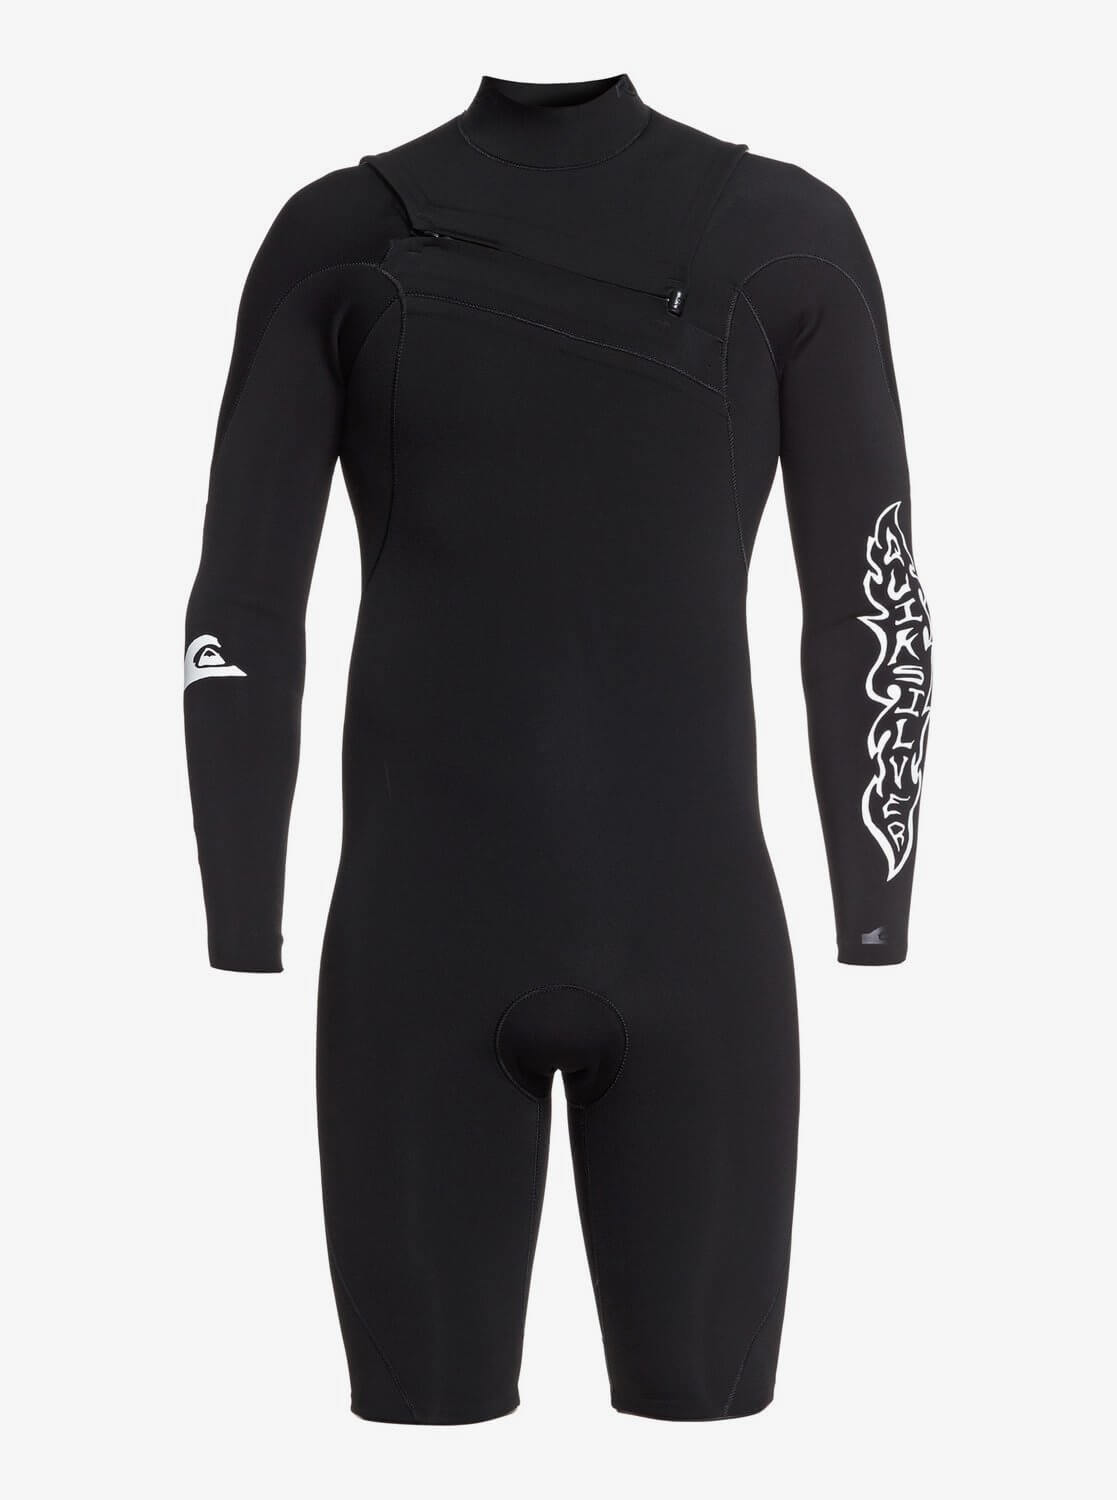 Quiksilver Mens 2020 | The 69 Capsule Surf Apparel Collection